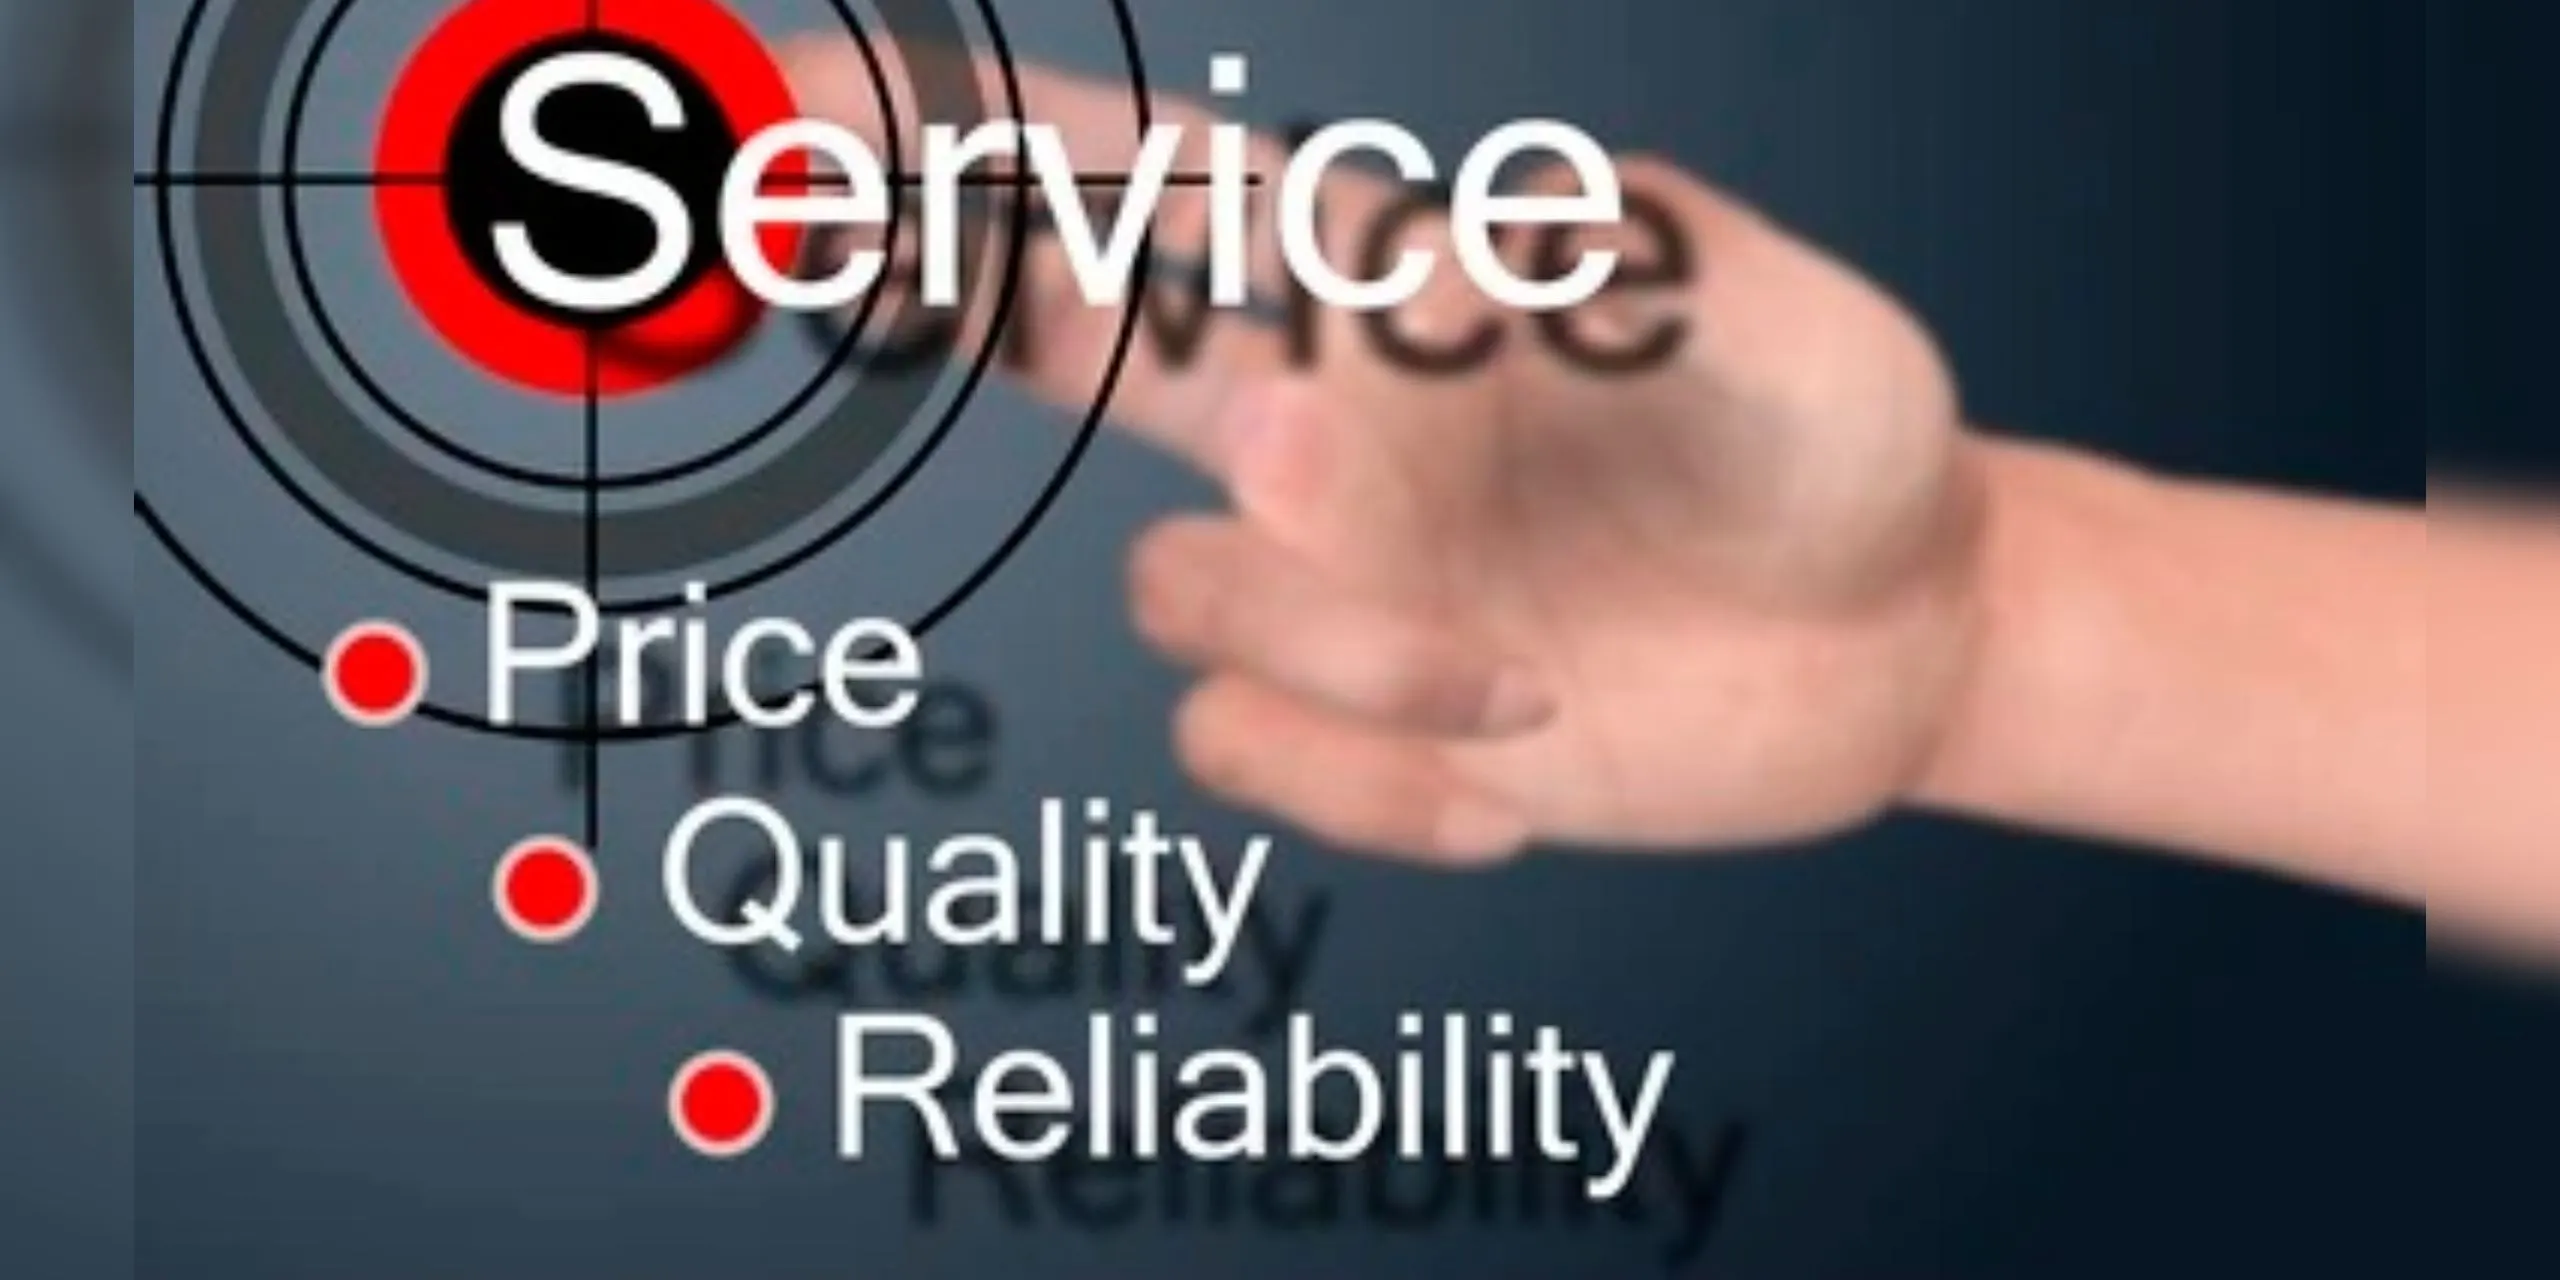 One vendor fulfills all your basic IT needs with the best rates and service in the industry!